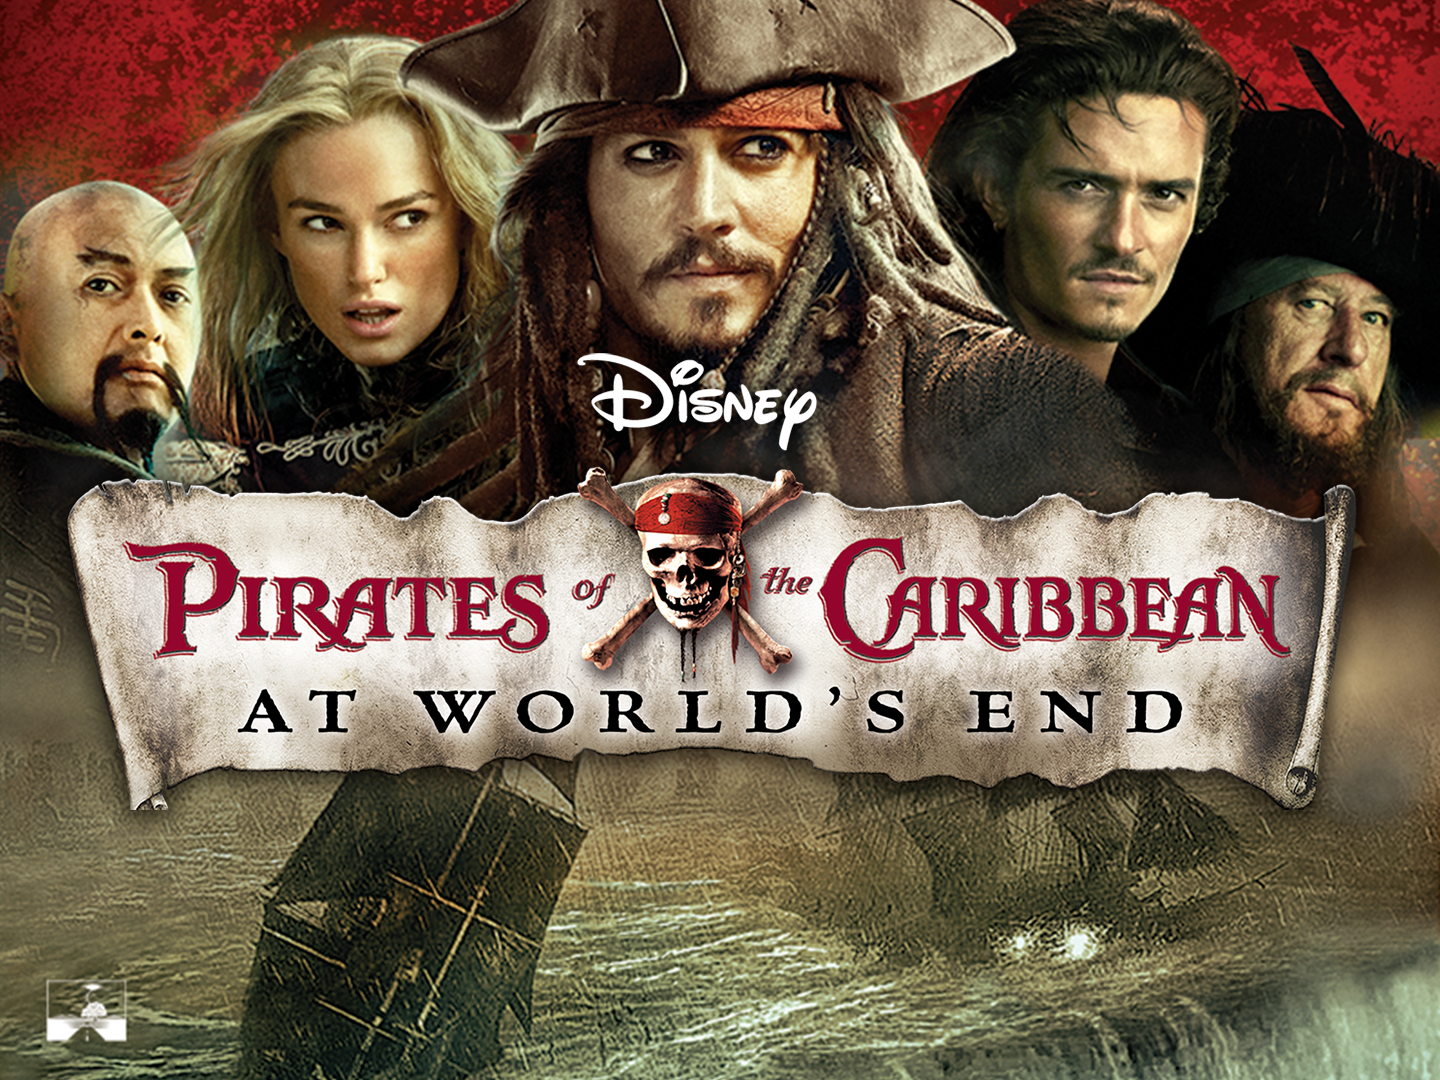 Pirates Of The Caribbean 1 Full Movie Mp4 Free Download In Hindi In Two Parts